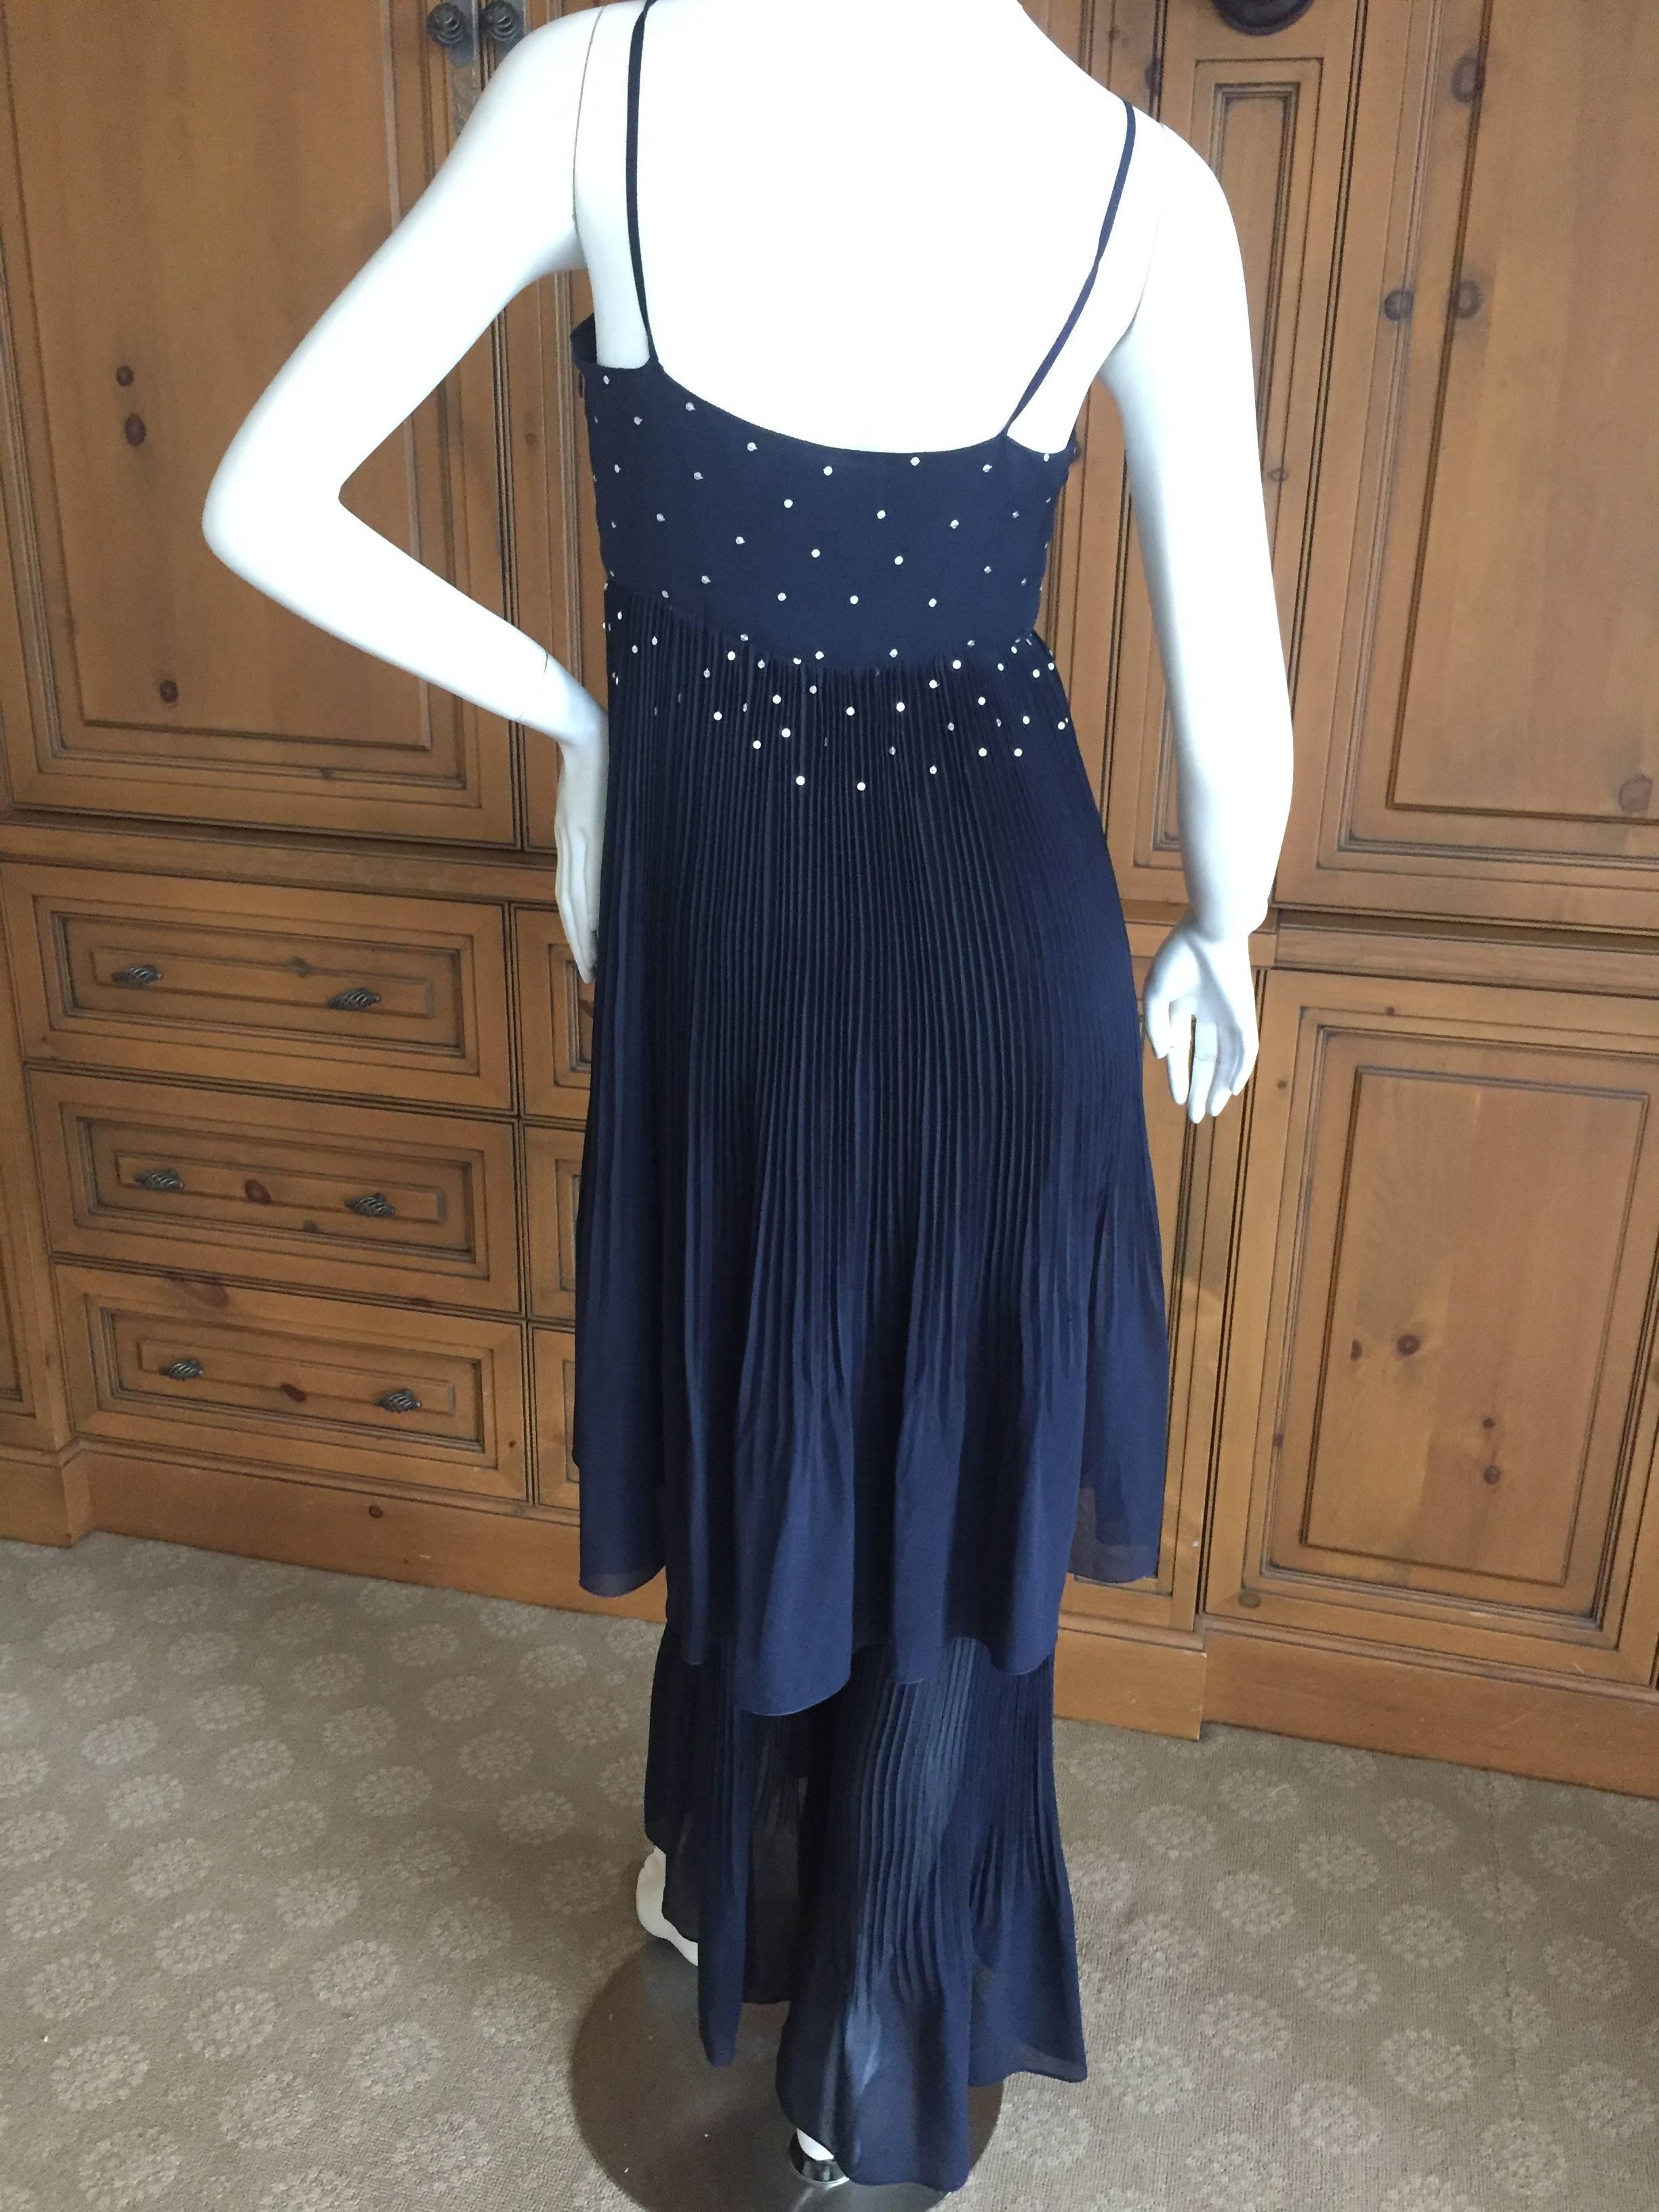 Chanel Navy Blue Dress with Silver Sequin Embellishment 4